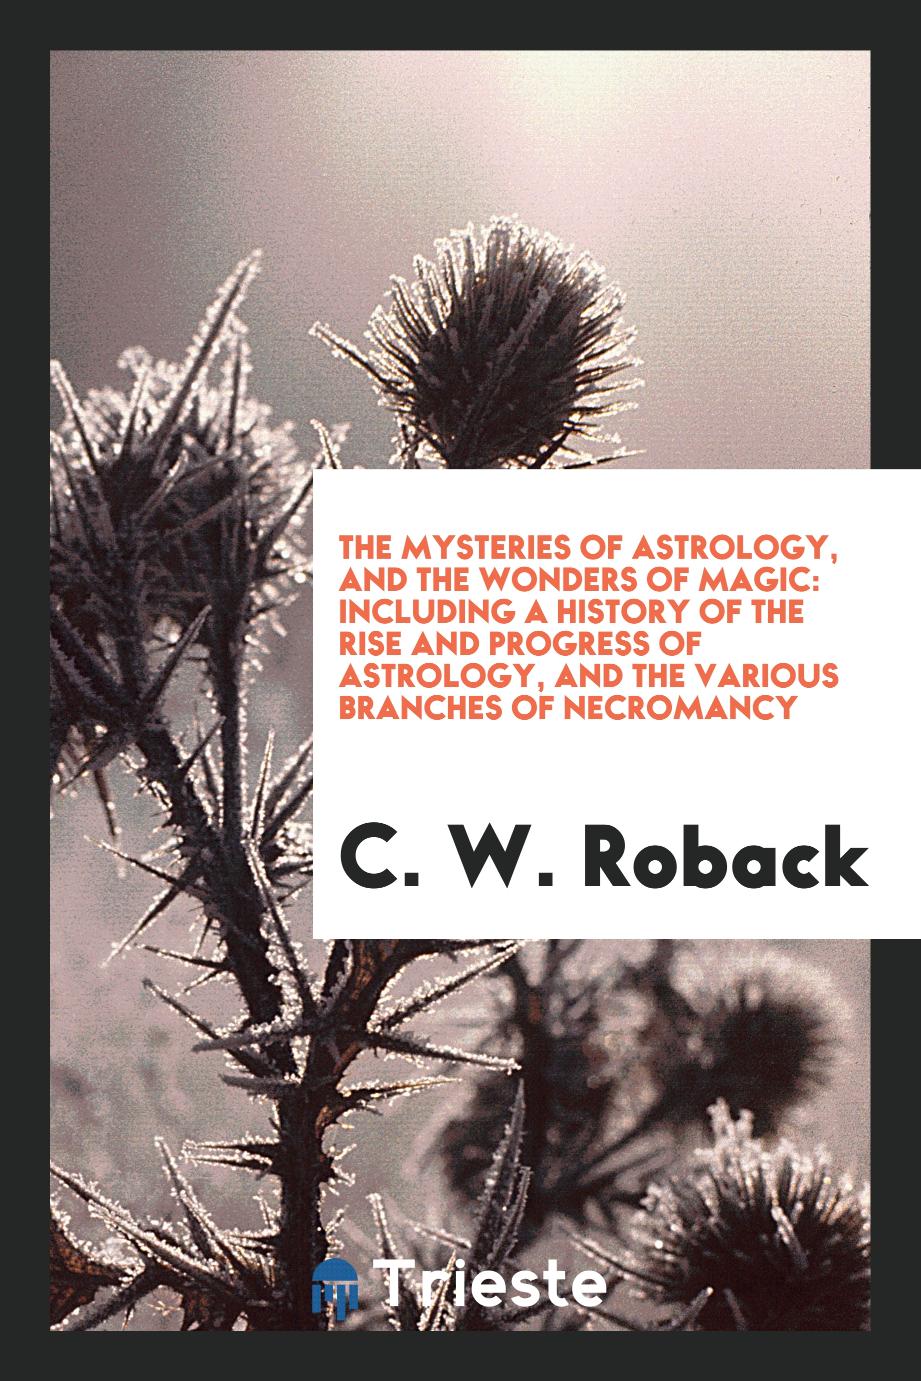 The Mysteries of Astrology, and the Wonders of Magic: Including a History of the Rise and Progress of Astrology, and the Various Branches of Necromancy